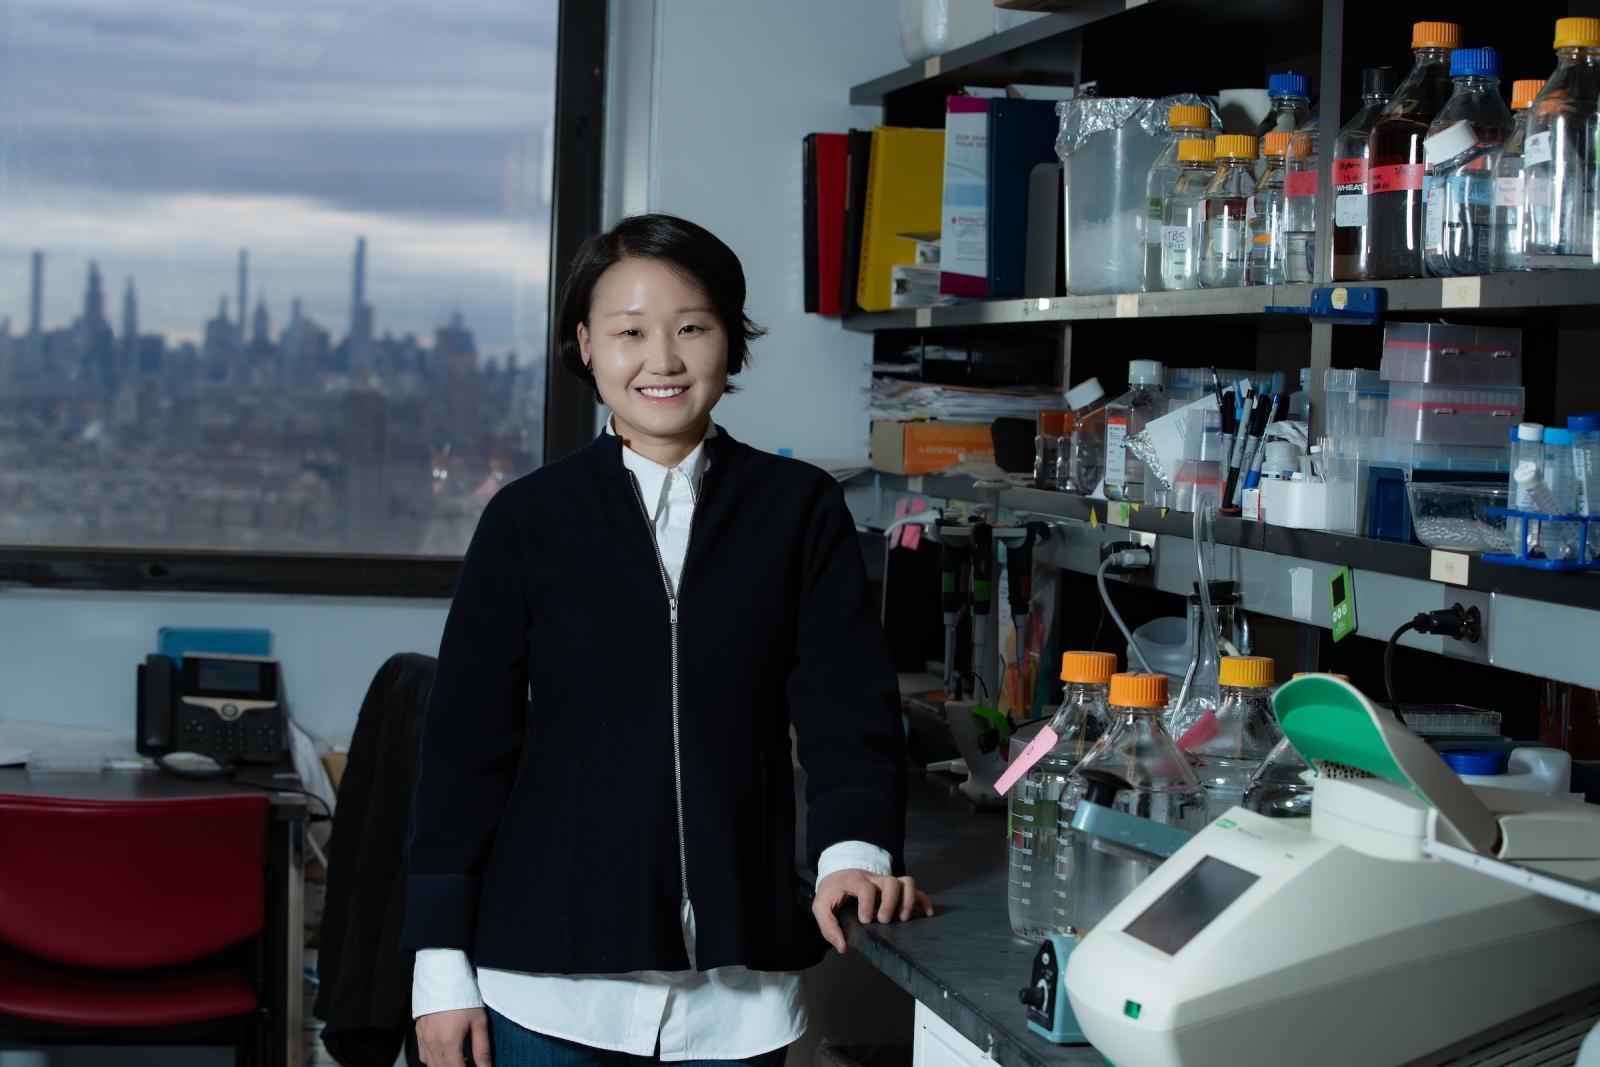 Hachung Chung, PhD standing next to her lab bench